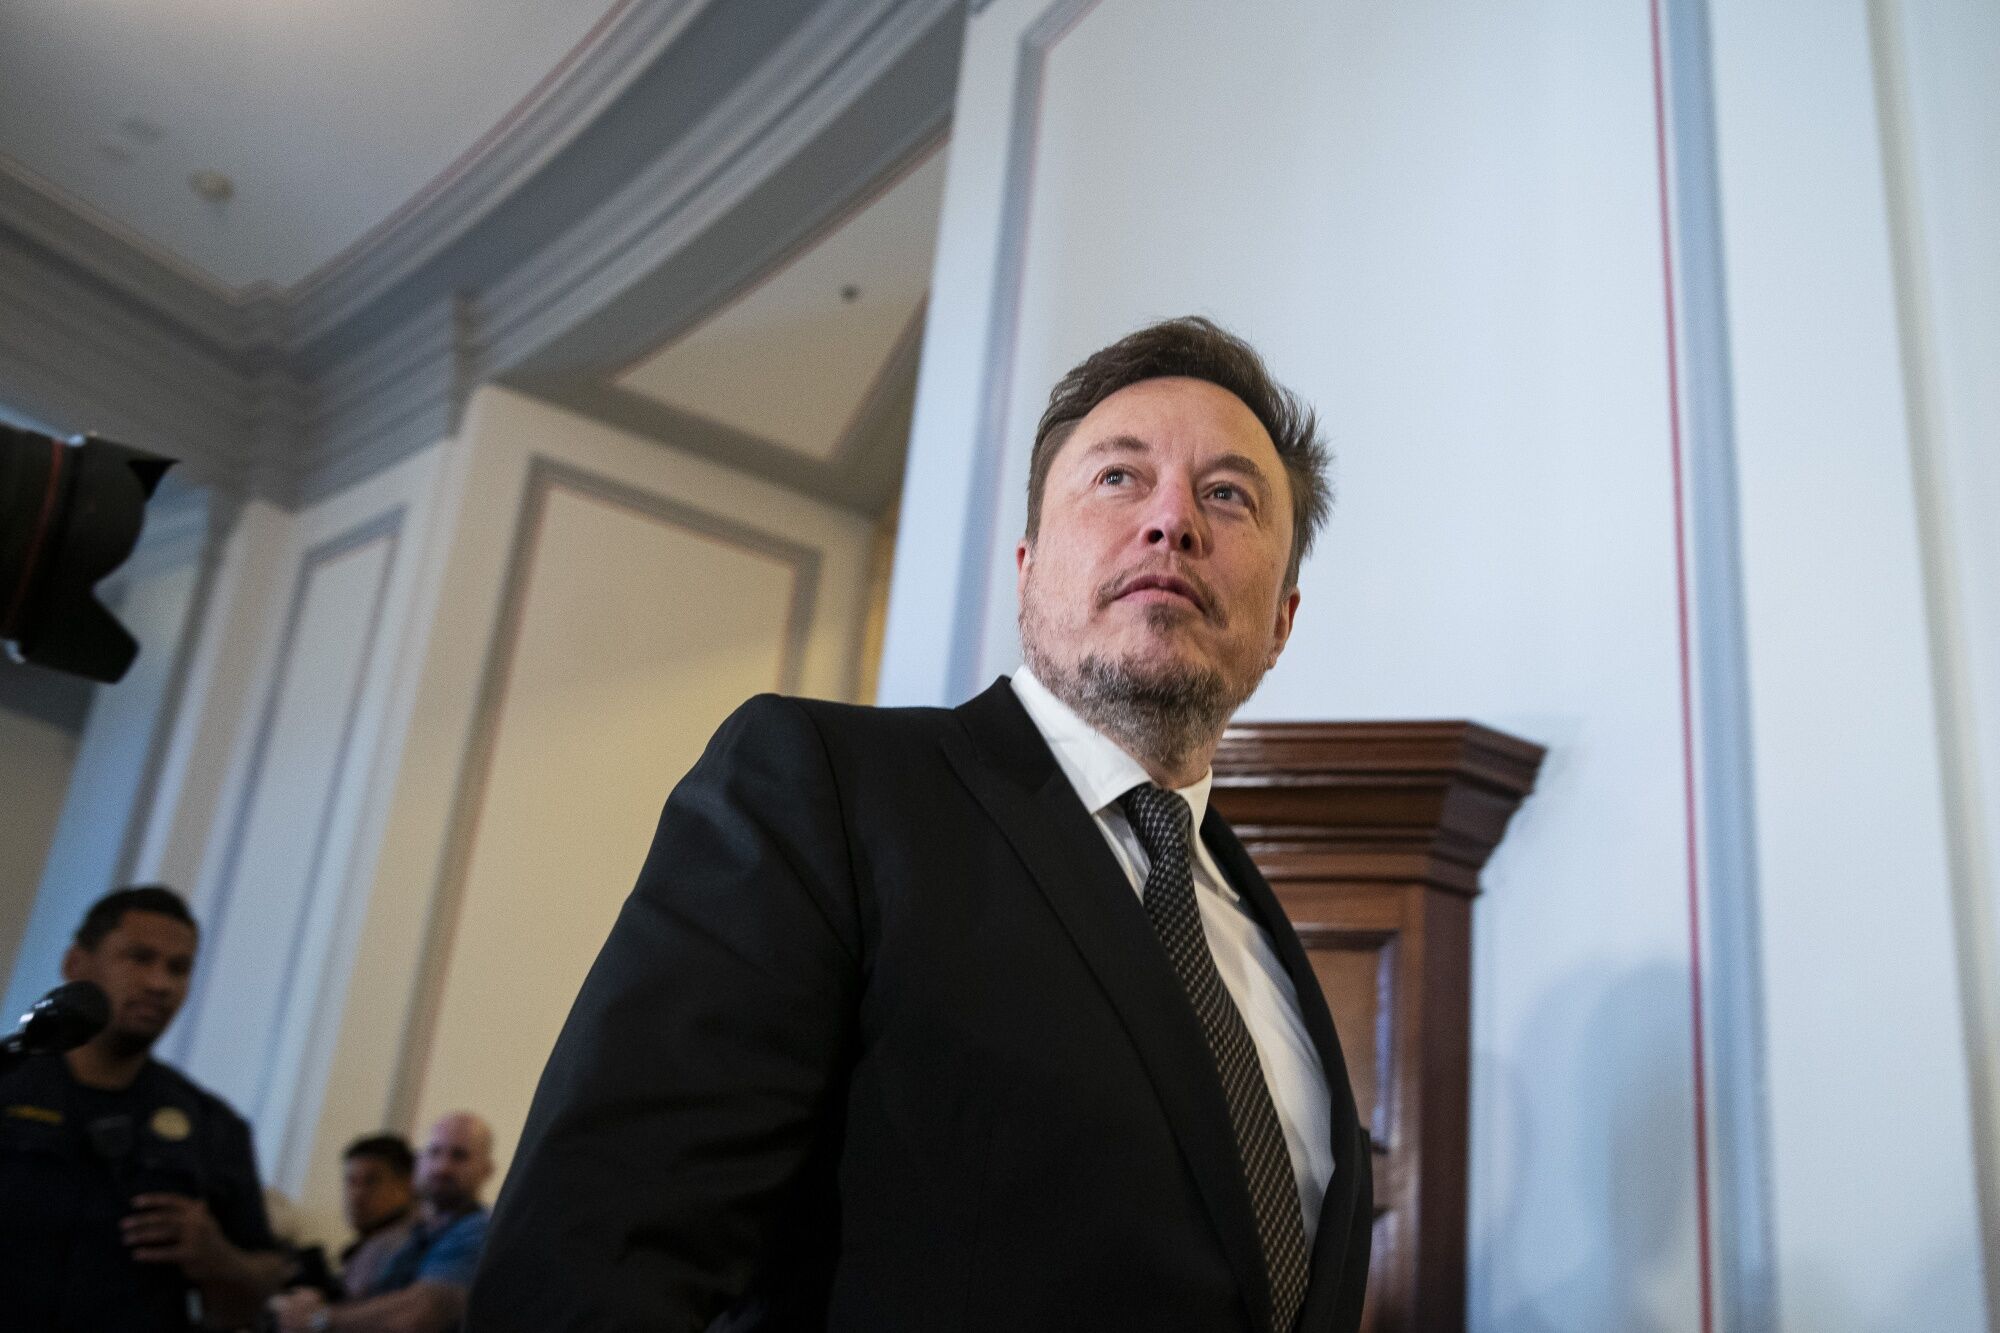 musk almost violated ftc privacy order before twitter staff stopped him